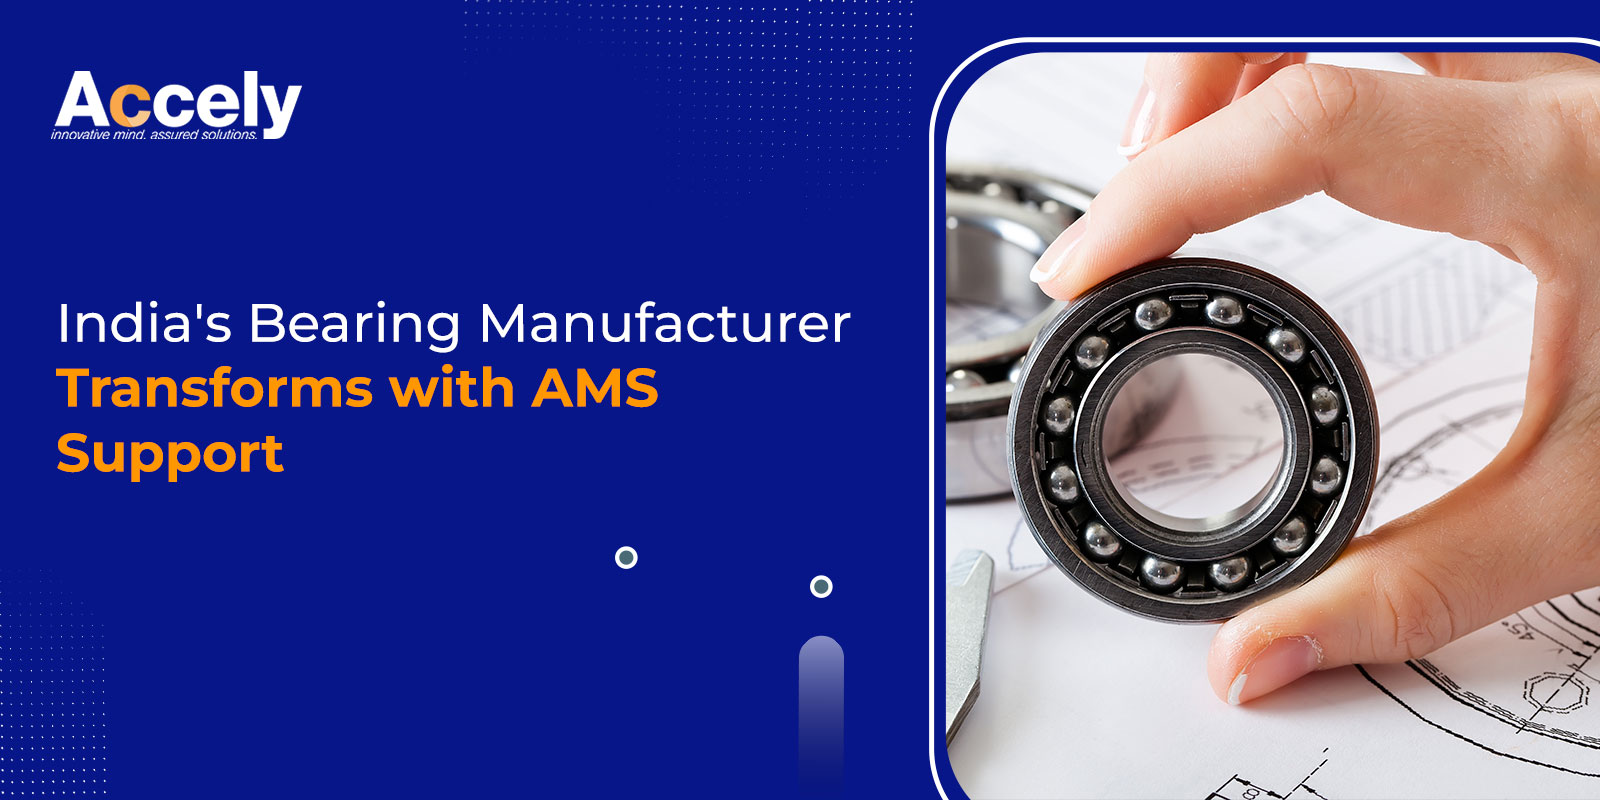 India's Bearing Manufacturer Transforms with AMS Support